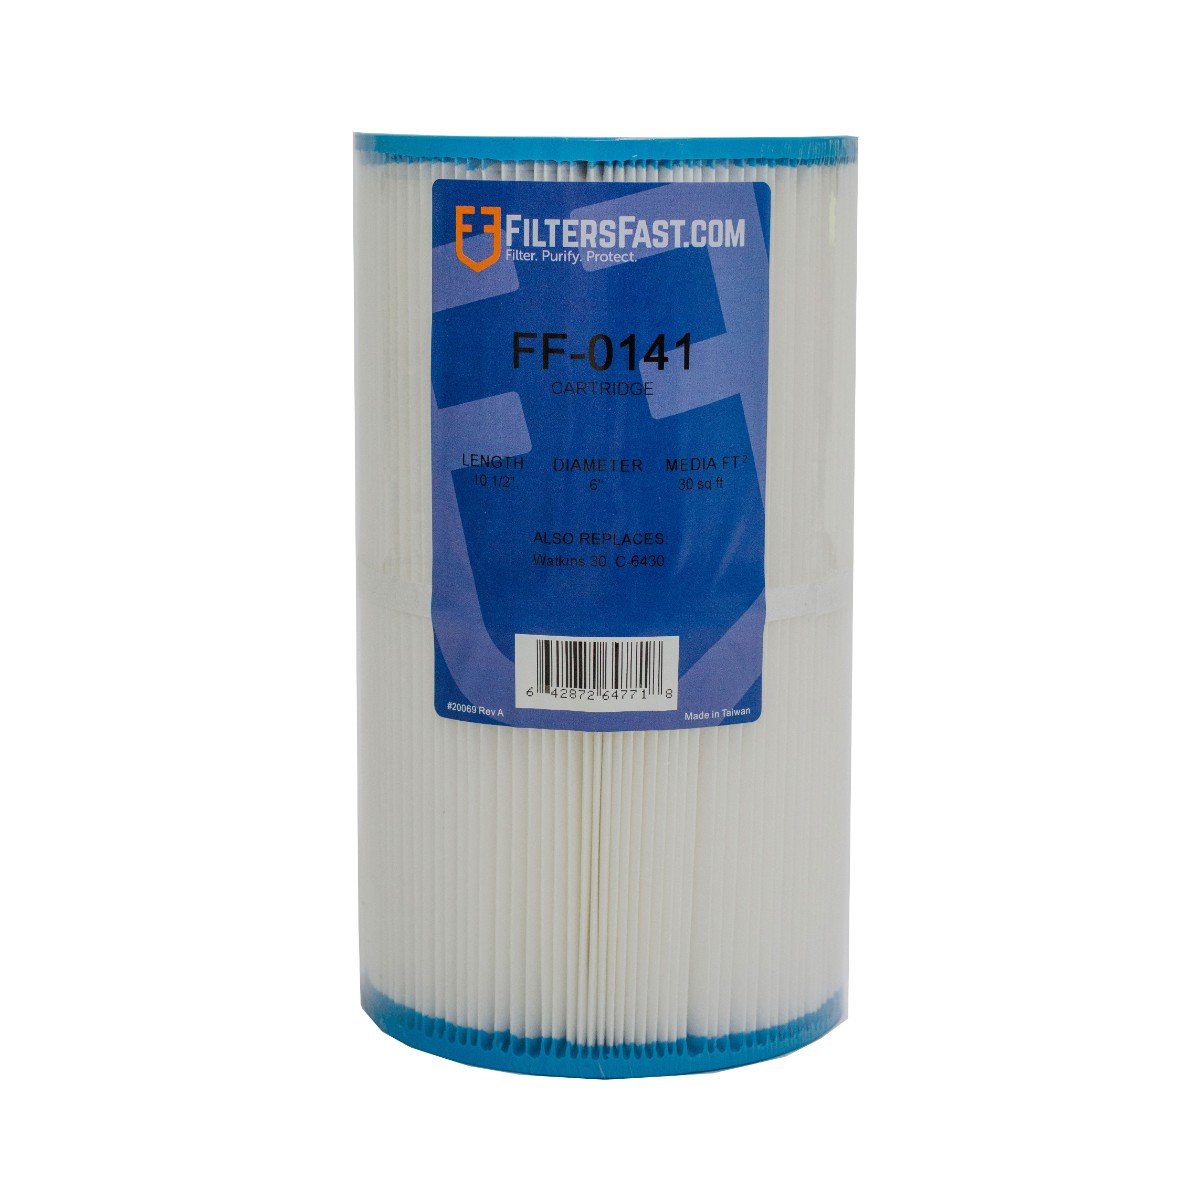 Filters Fast&reg; FF-0141 Replacement Pool & Spa Filter